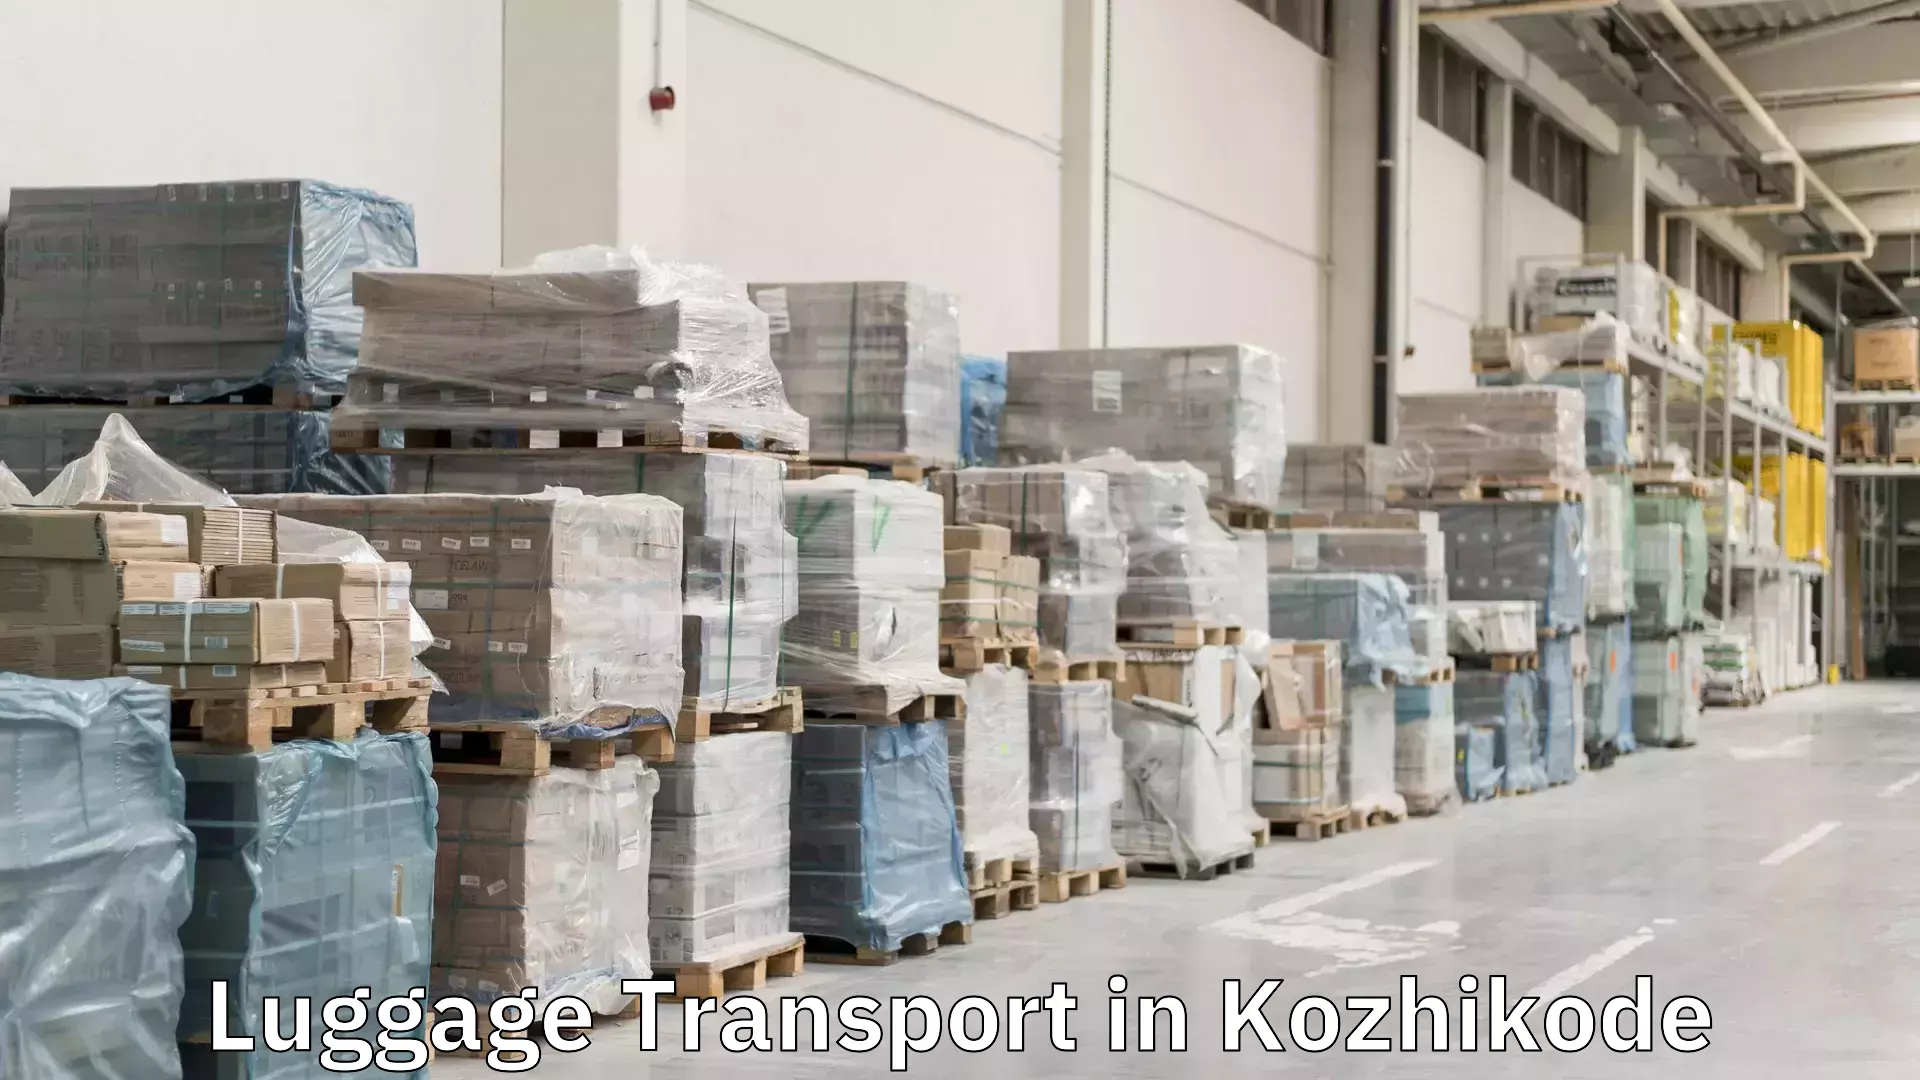 Luggage shipment specialists in Kozhikode